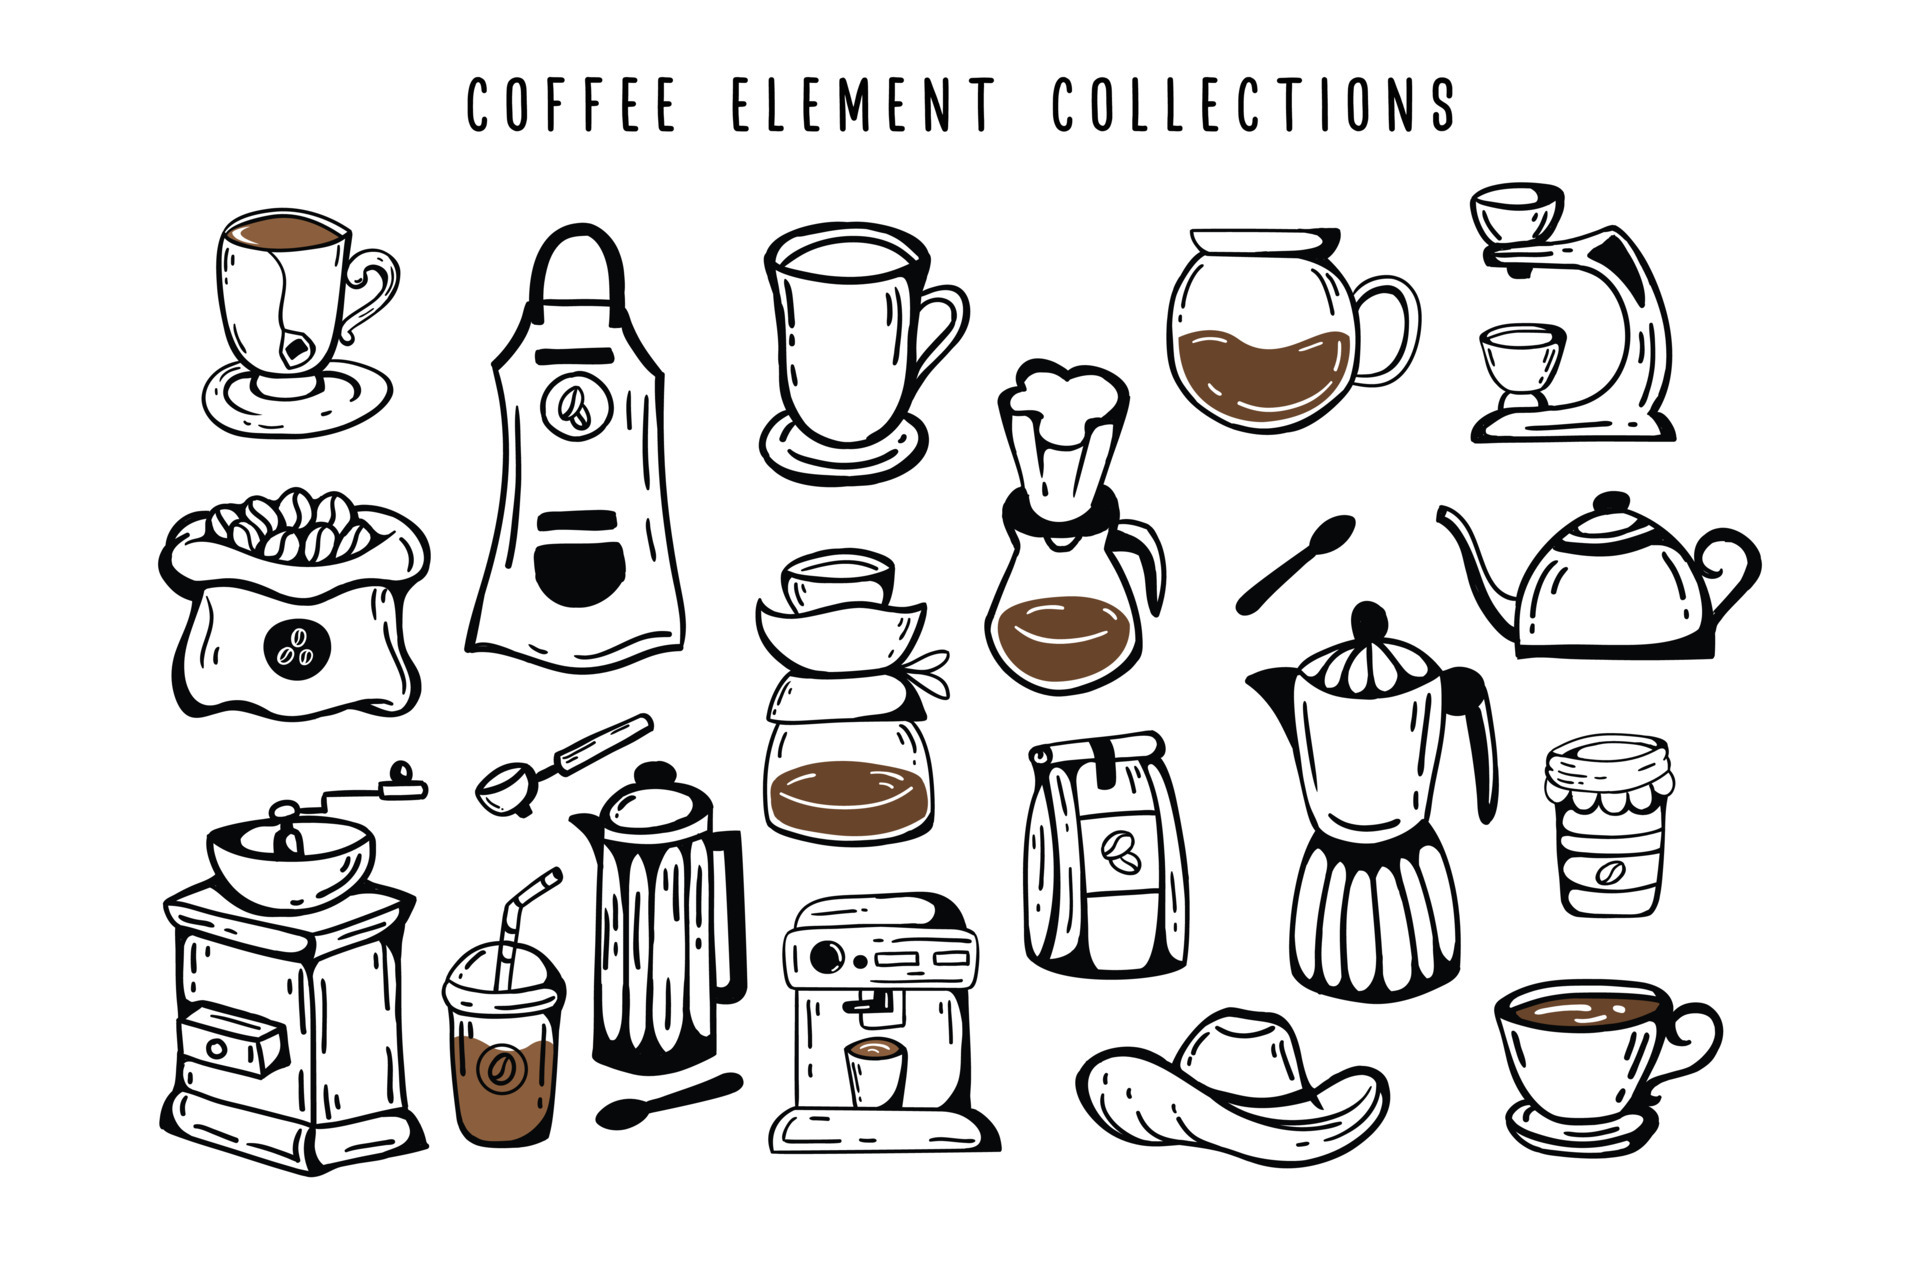 https://static.vecteezy.com/system/resources/previews/007/110/116/original/set-of-hand-drawn-coffee-elements-vector.jpg